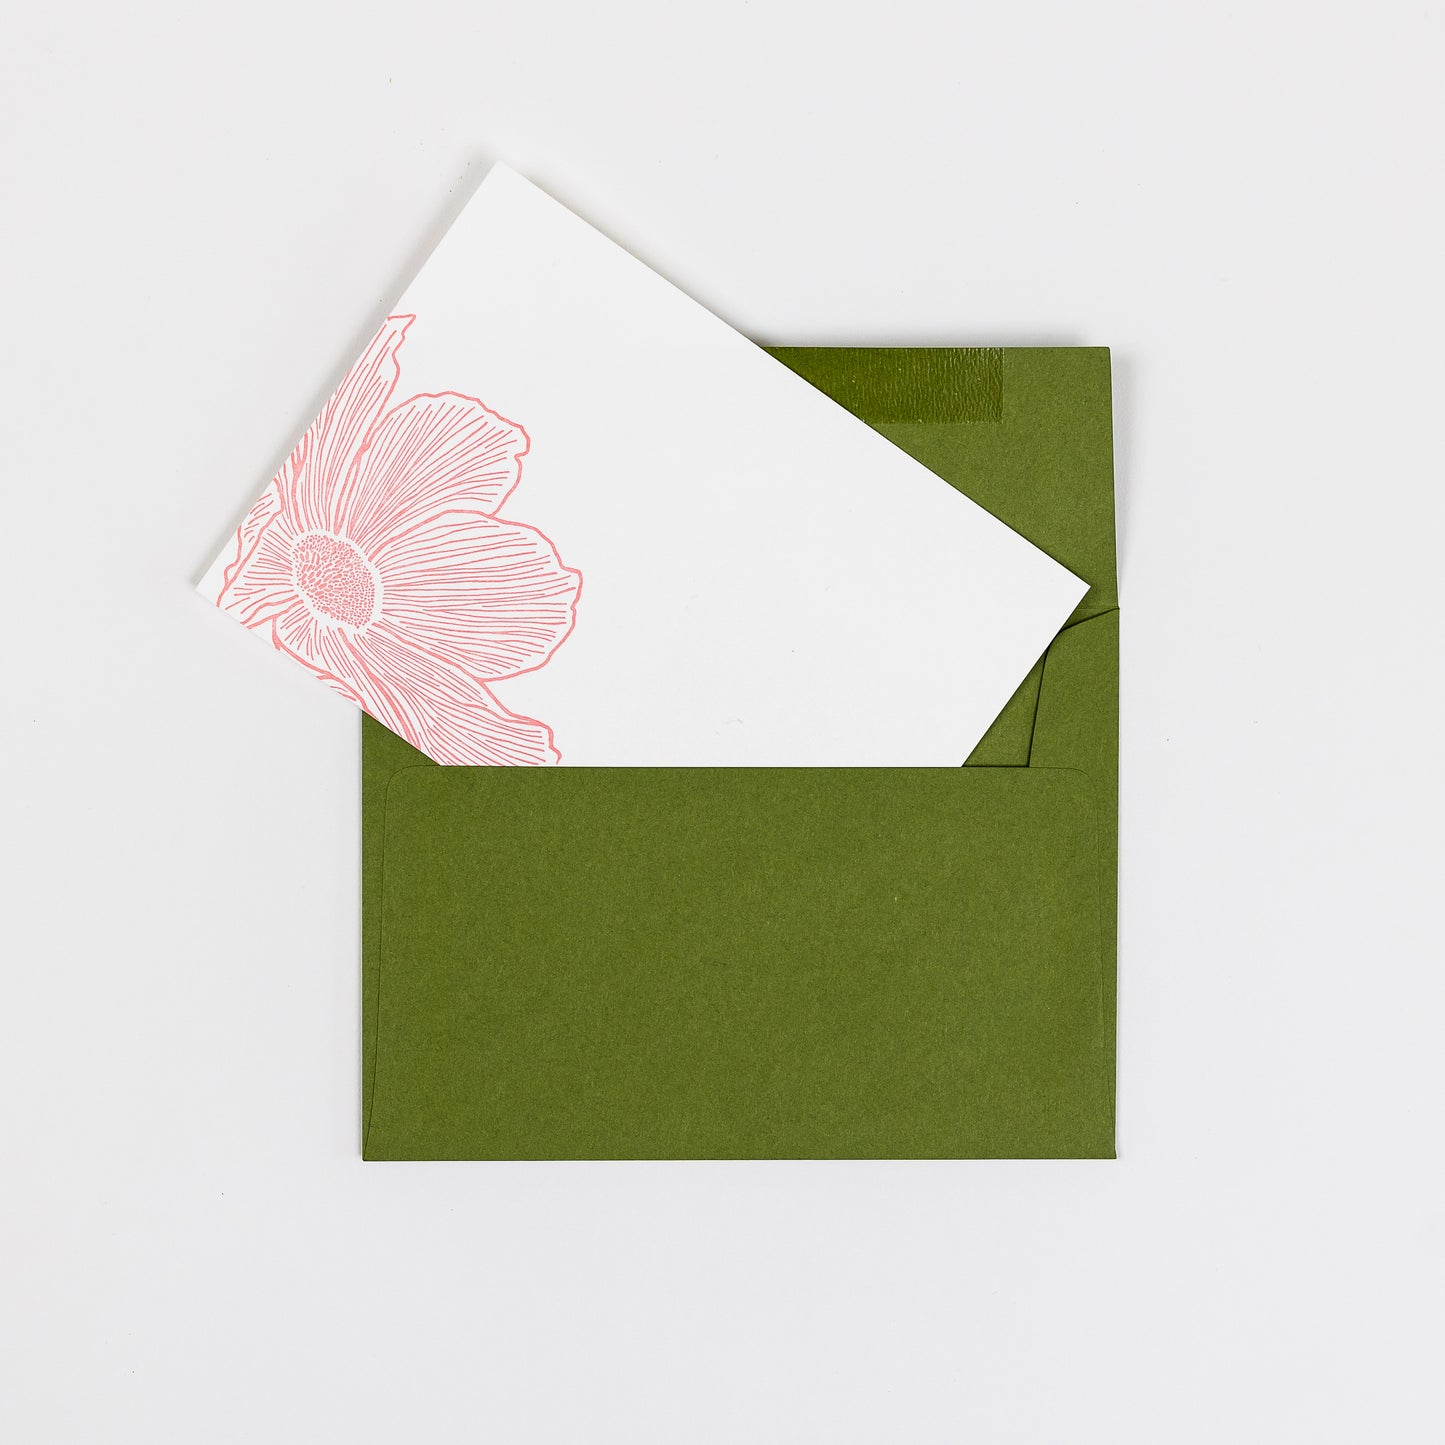 Set of 10 Letterpress Note Cards featuring a hand-drawn cosmos flower, letterpress printed in a soft peachy-pink ink onto 100% cotton paper. Includes 10 rich green envelopes. Size A6.  